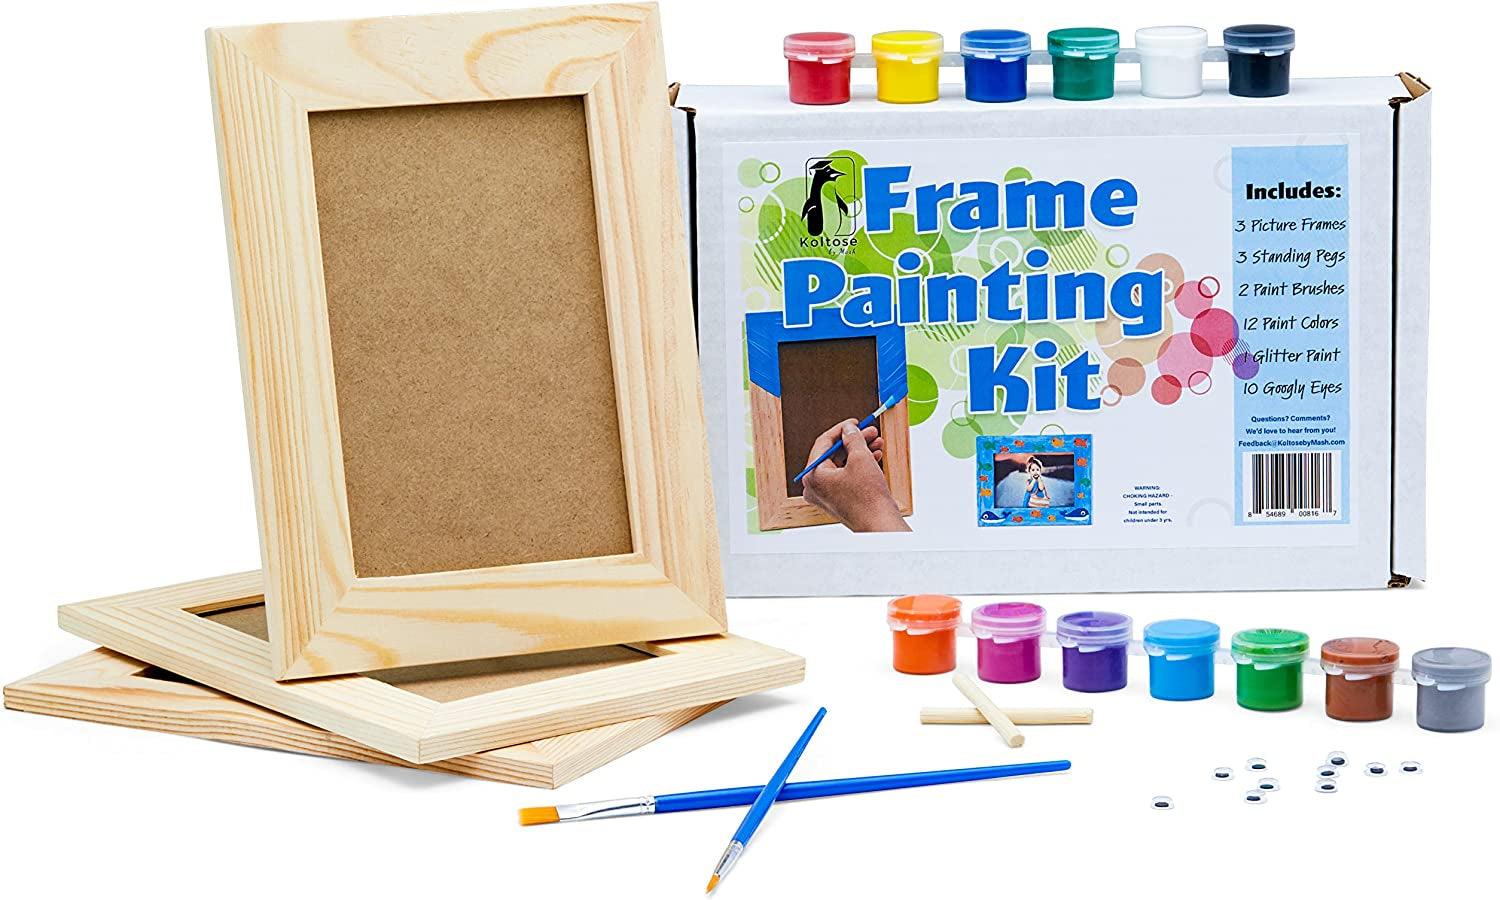 http://woodartsupply.com/cdn/shop/files/picture-frame-painting-craft-kit-diy-arts-and-crafts-kit-3-unfinished-solid-wood-picture-frames-6x4-photos-woodartsupply-1_50e2494d-42ce-49d5-9e42-15ed0157e433.jpg?v=1696178504